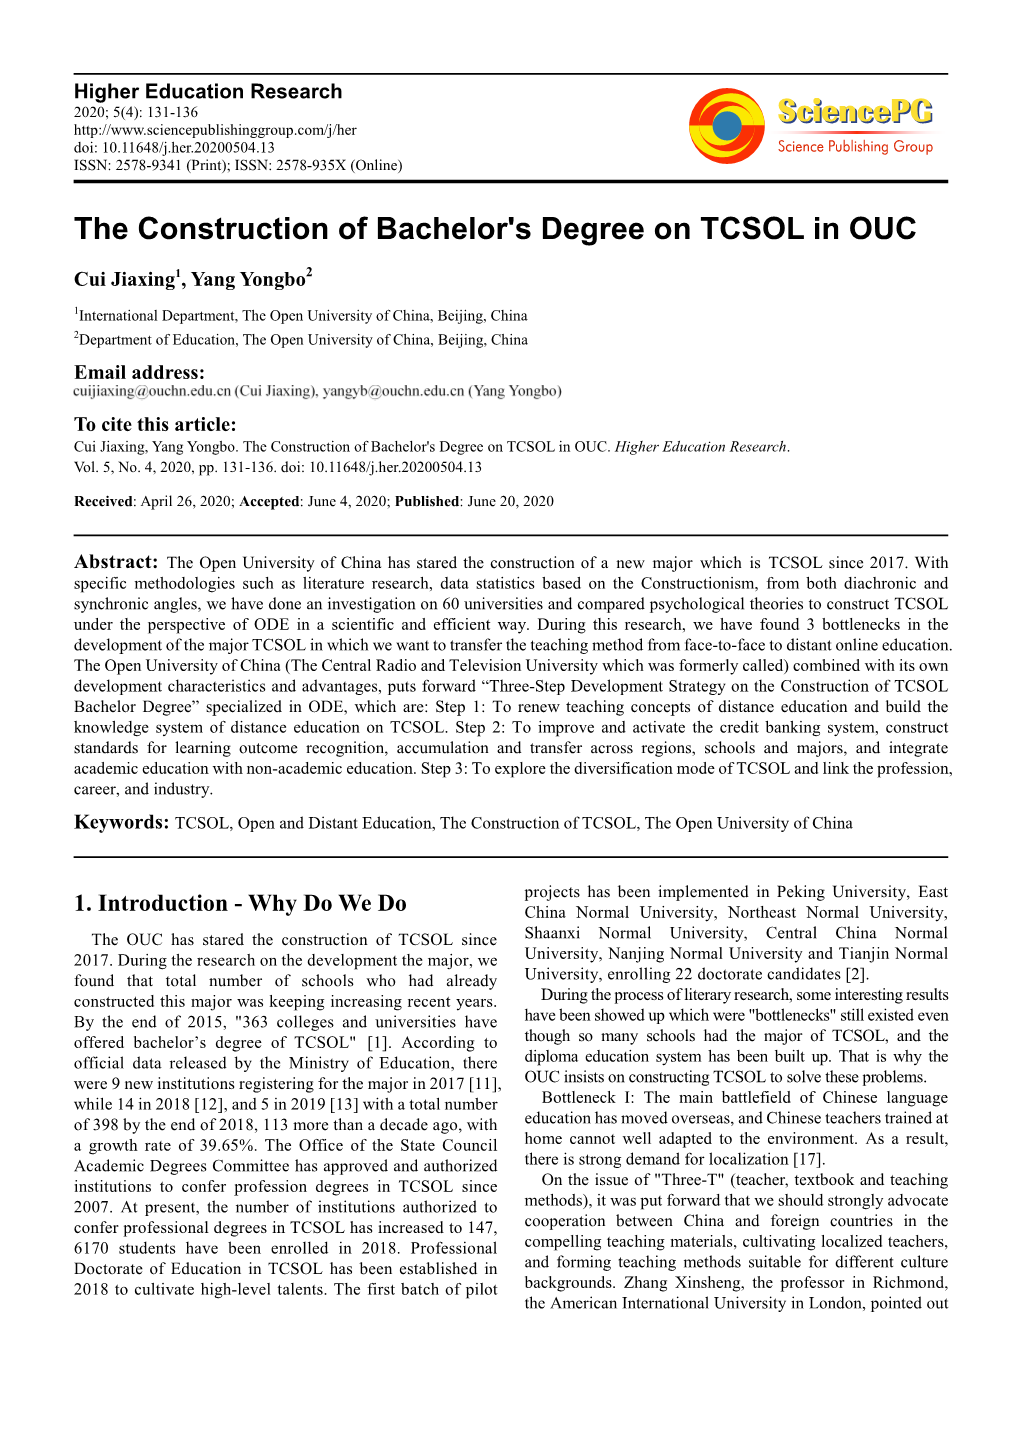 The Construction of Bachelor's Degree on TCSOL in OUC